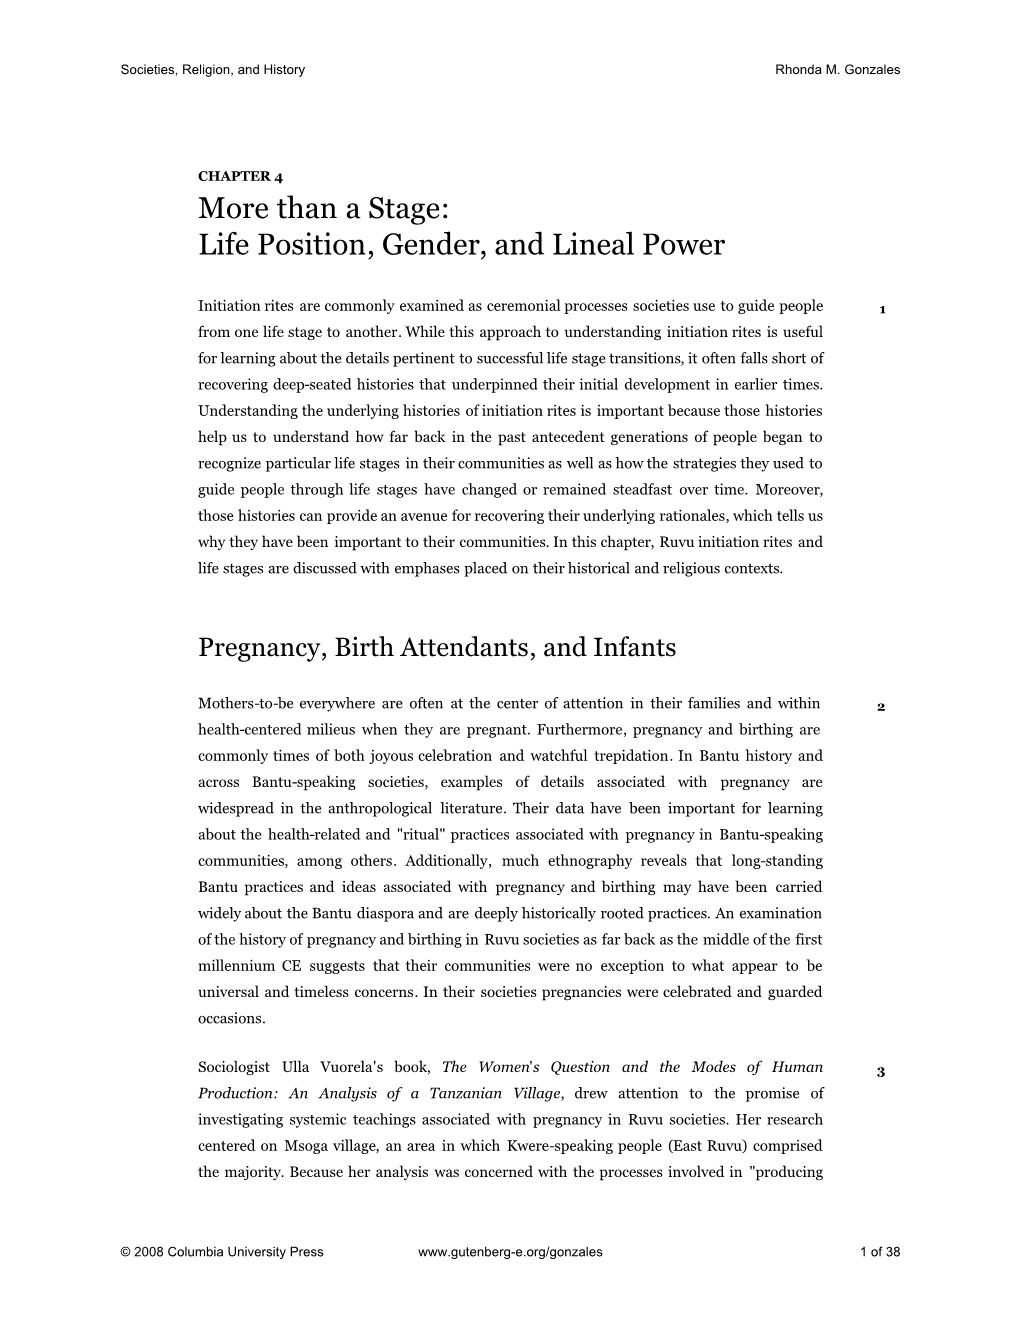 CHAPTER 4 More Than a Stage: Life Position, Gender, and Lineal Power